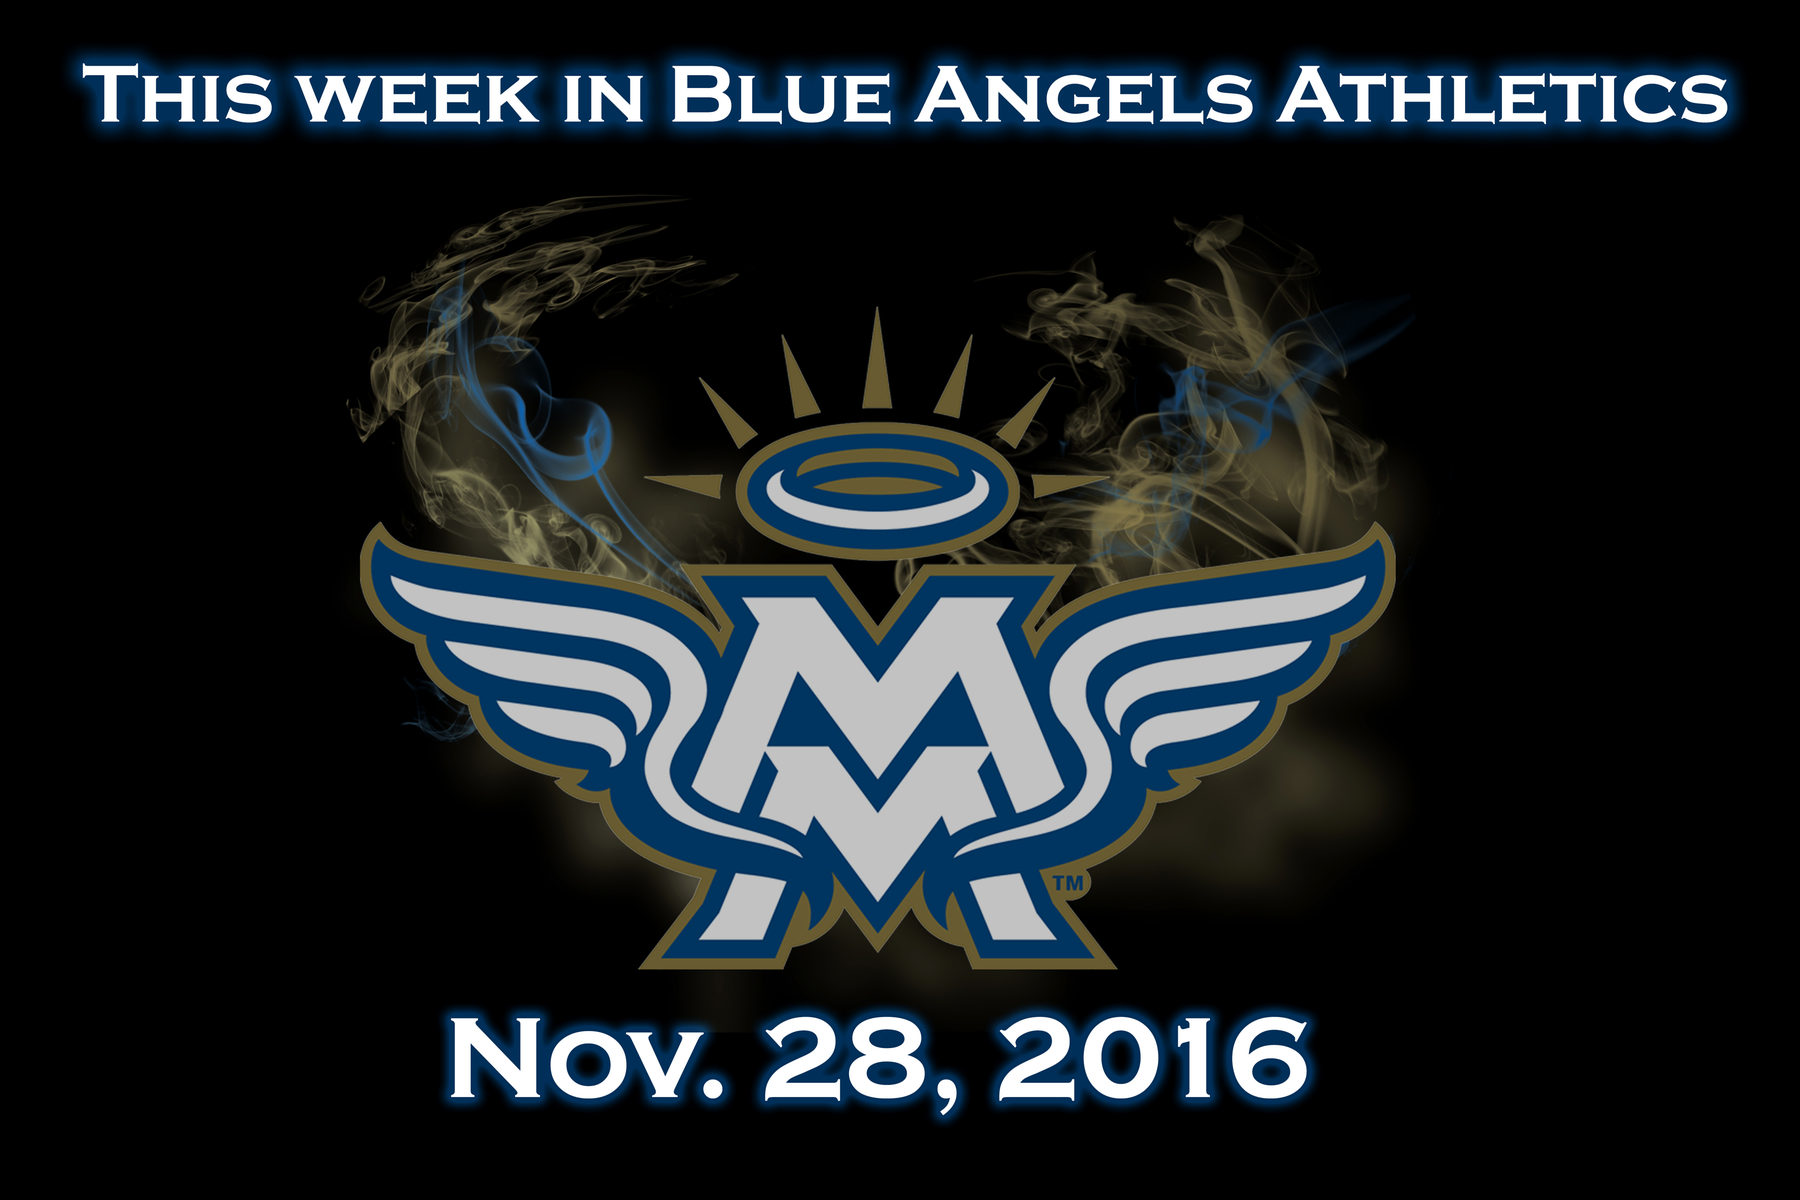 Blue Angels Weekly Preview 11-28-16